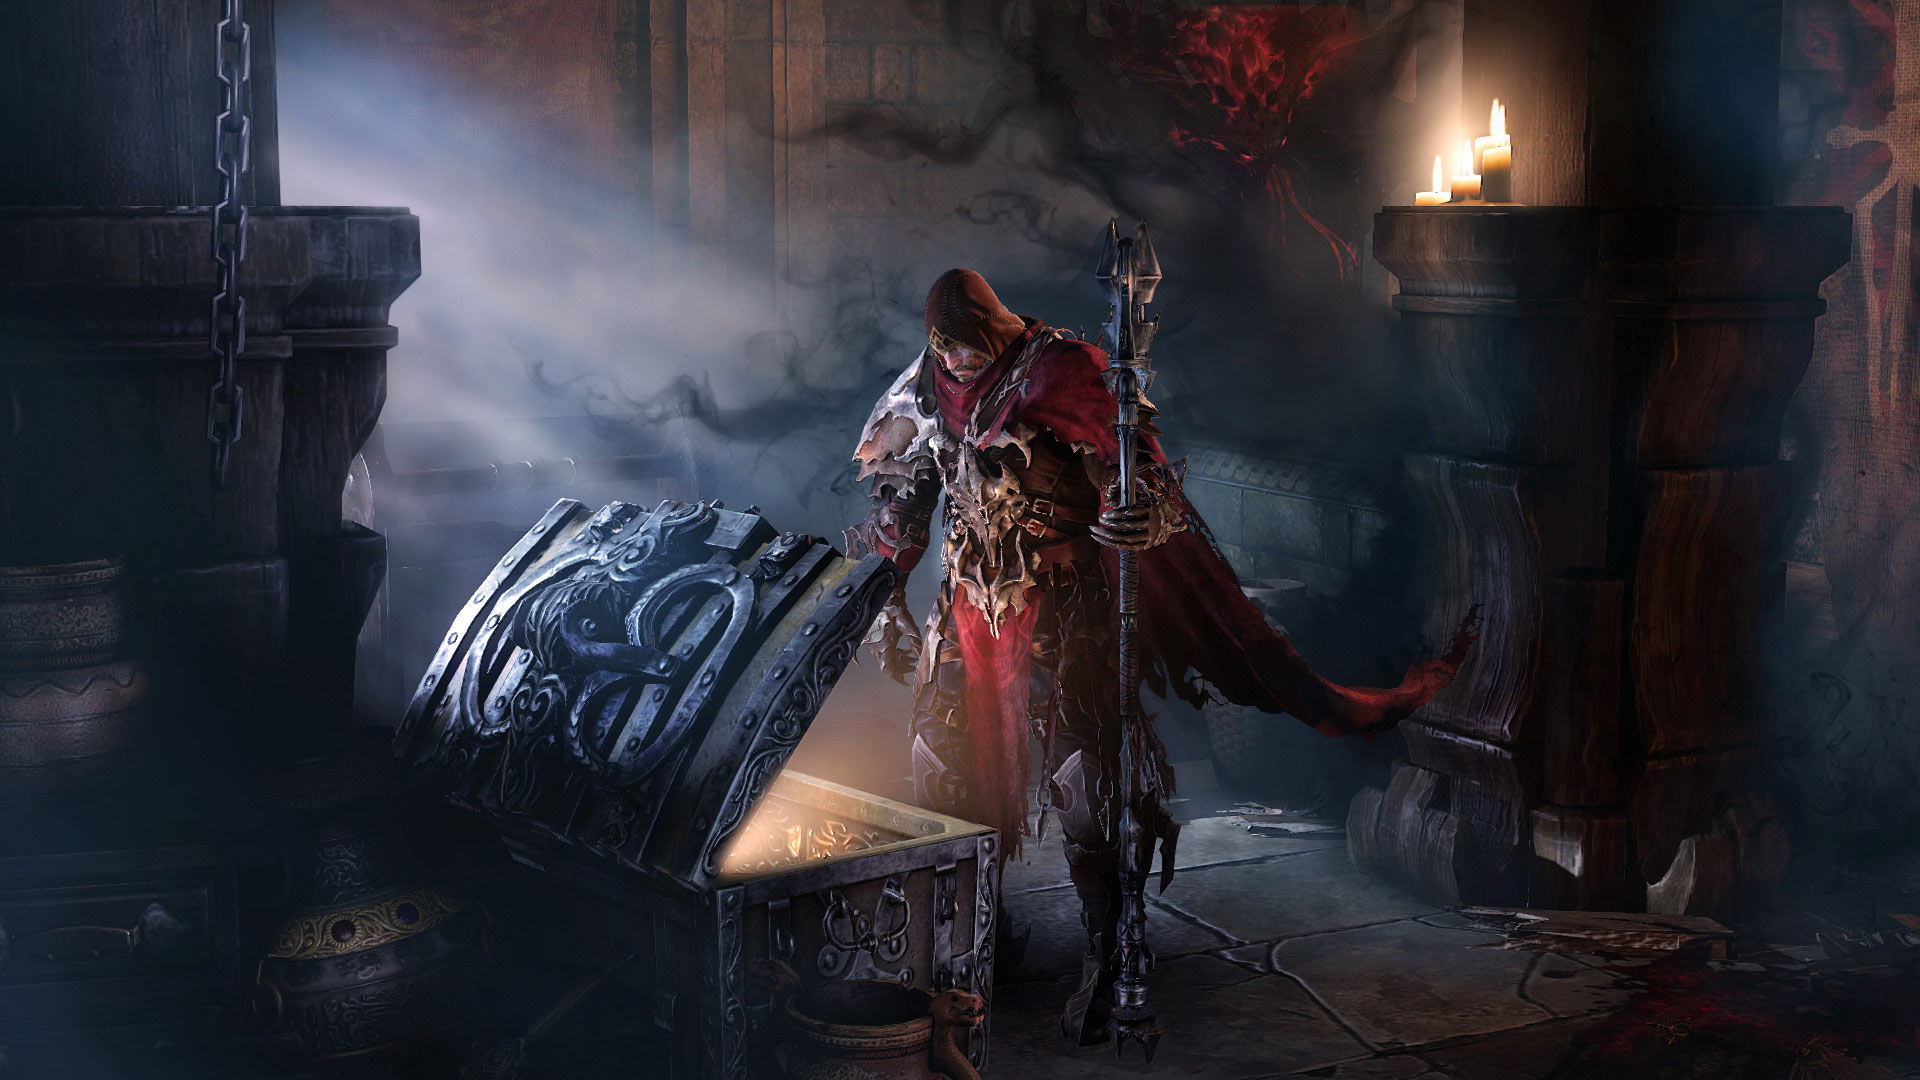 Quests, Maps and Secrets in Lords of the Fallen #, #spon, #Secrets, #Lords,  #Fallen, #download #Ad